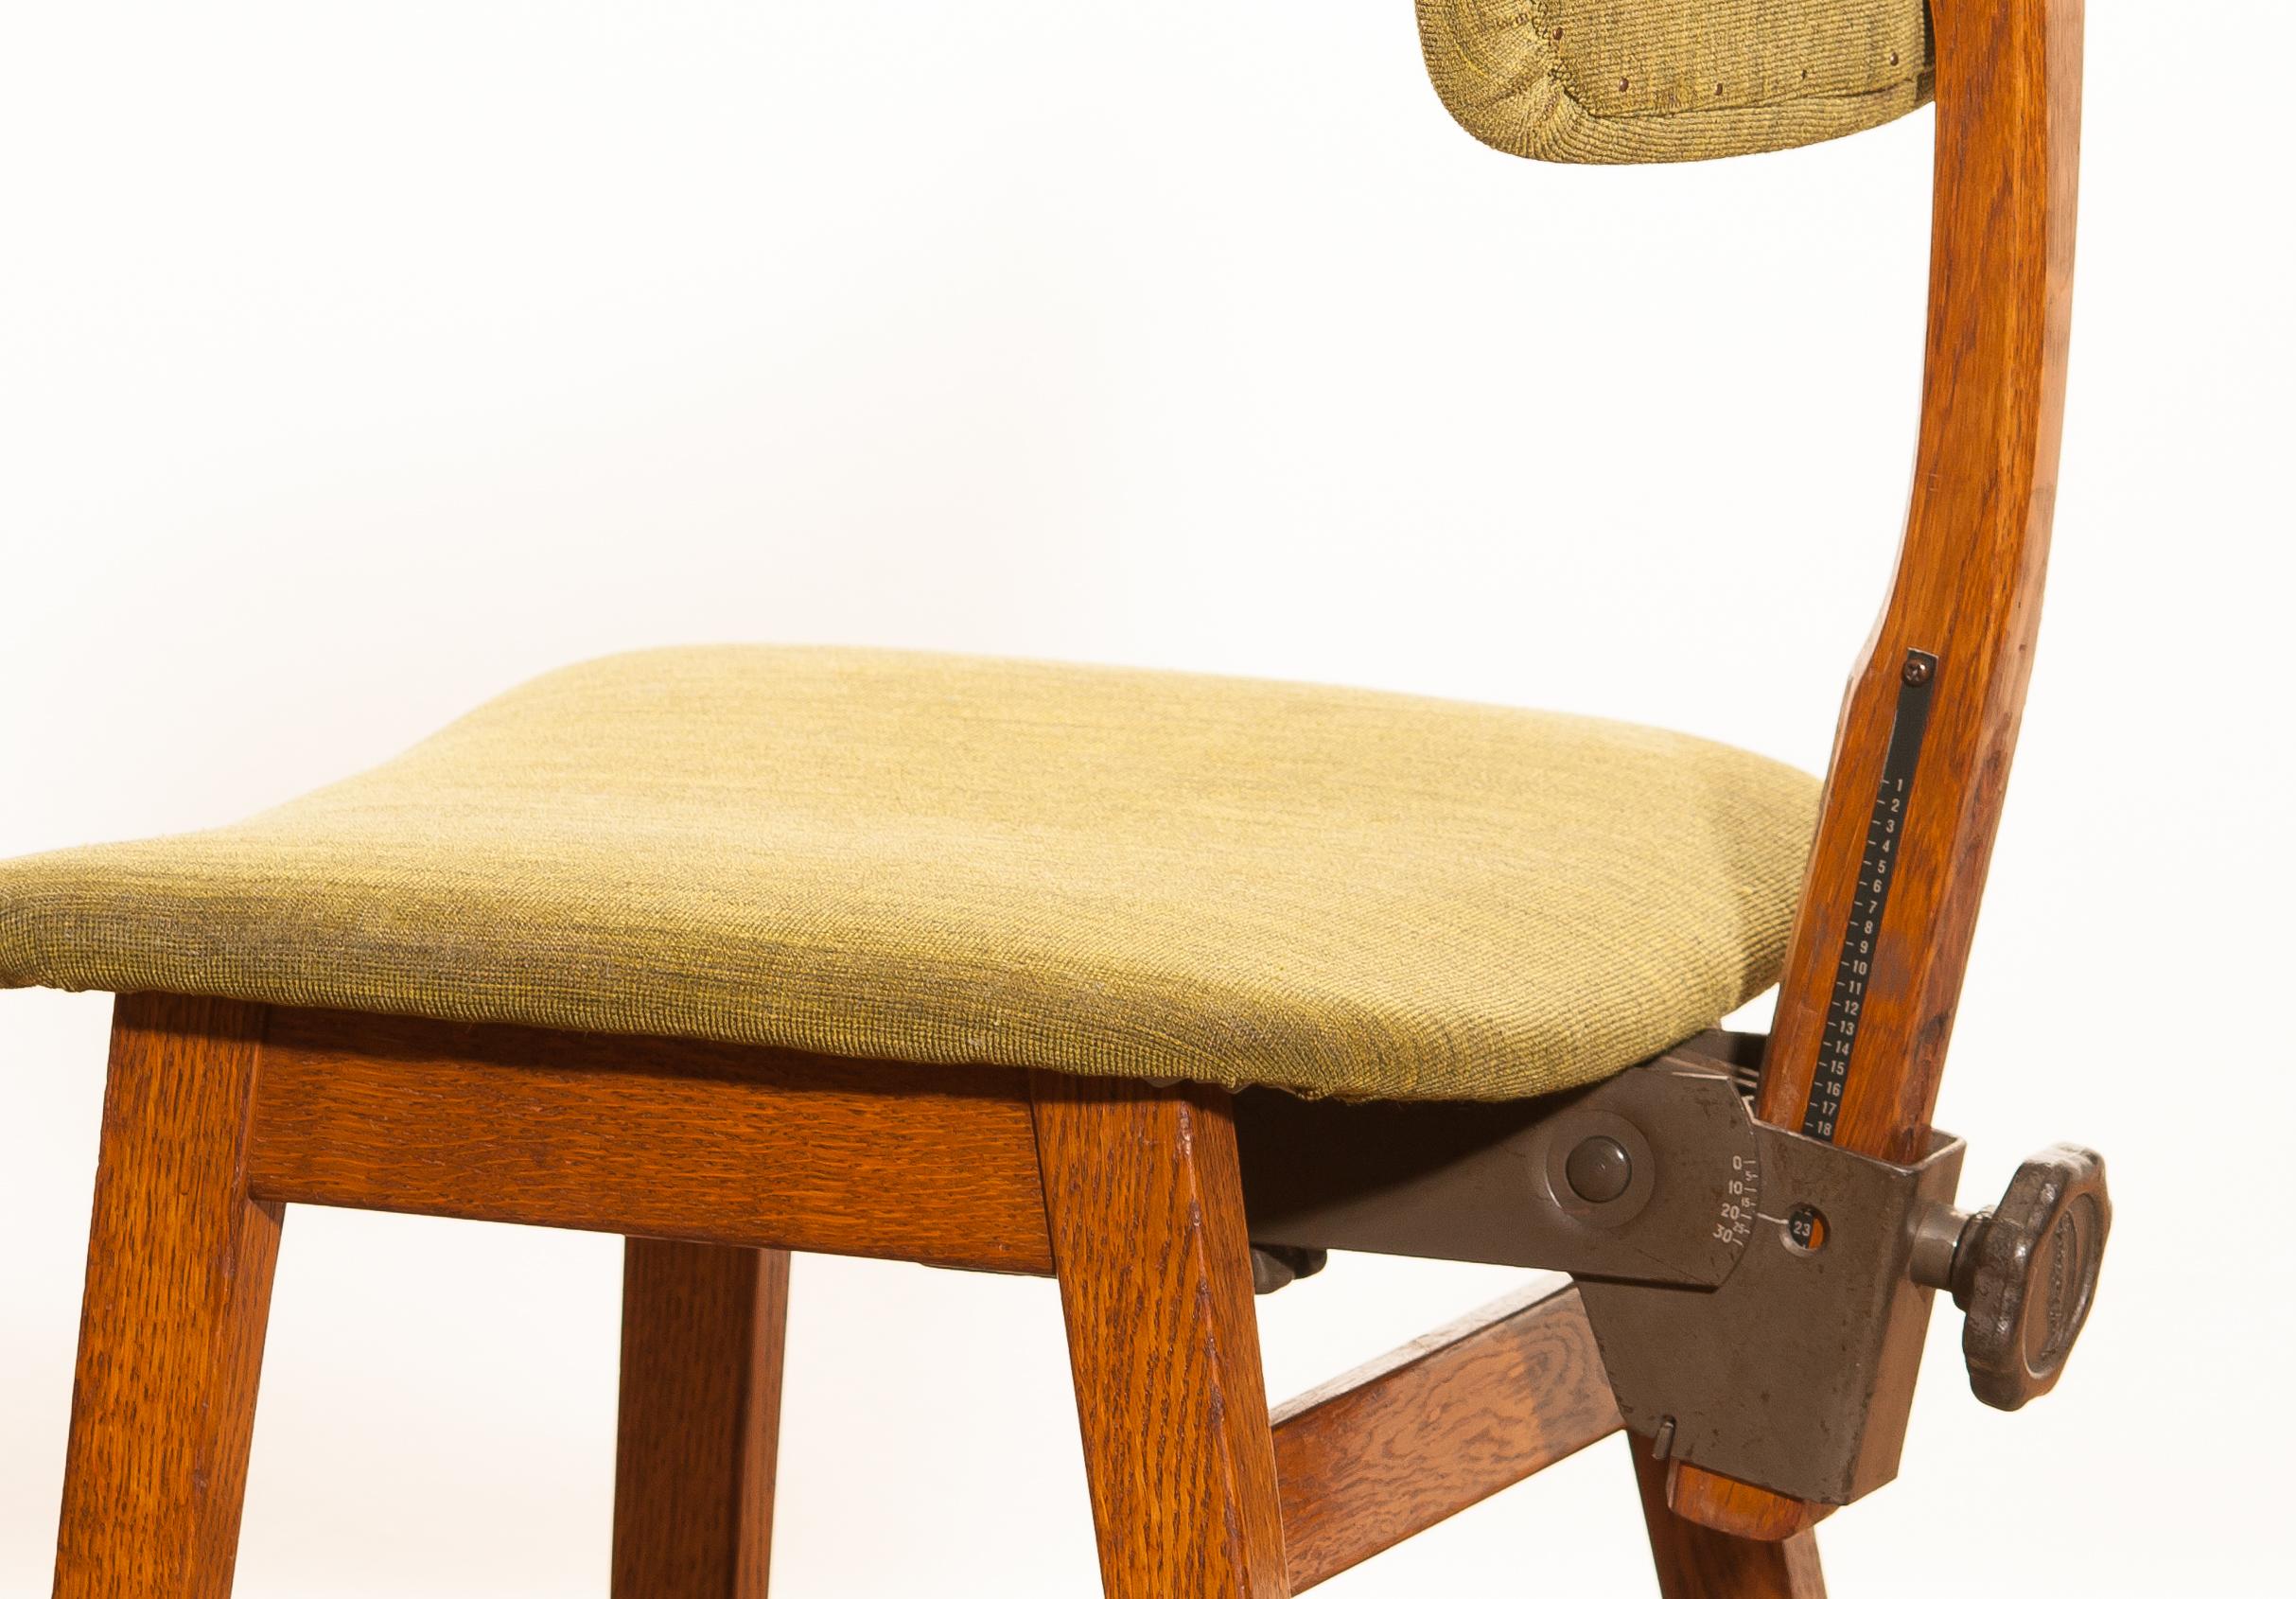 1940s, Oak and Wool Desk Chair by Âtvidabergs, Sweden 3